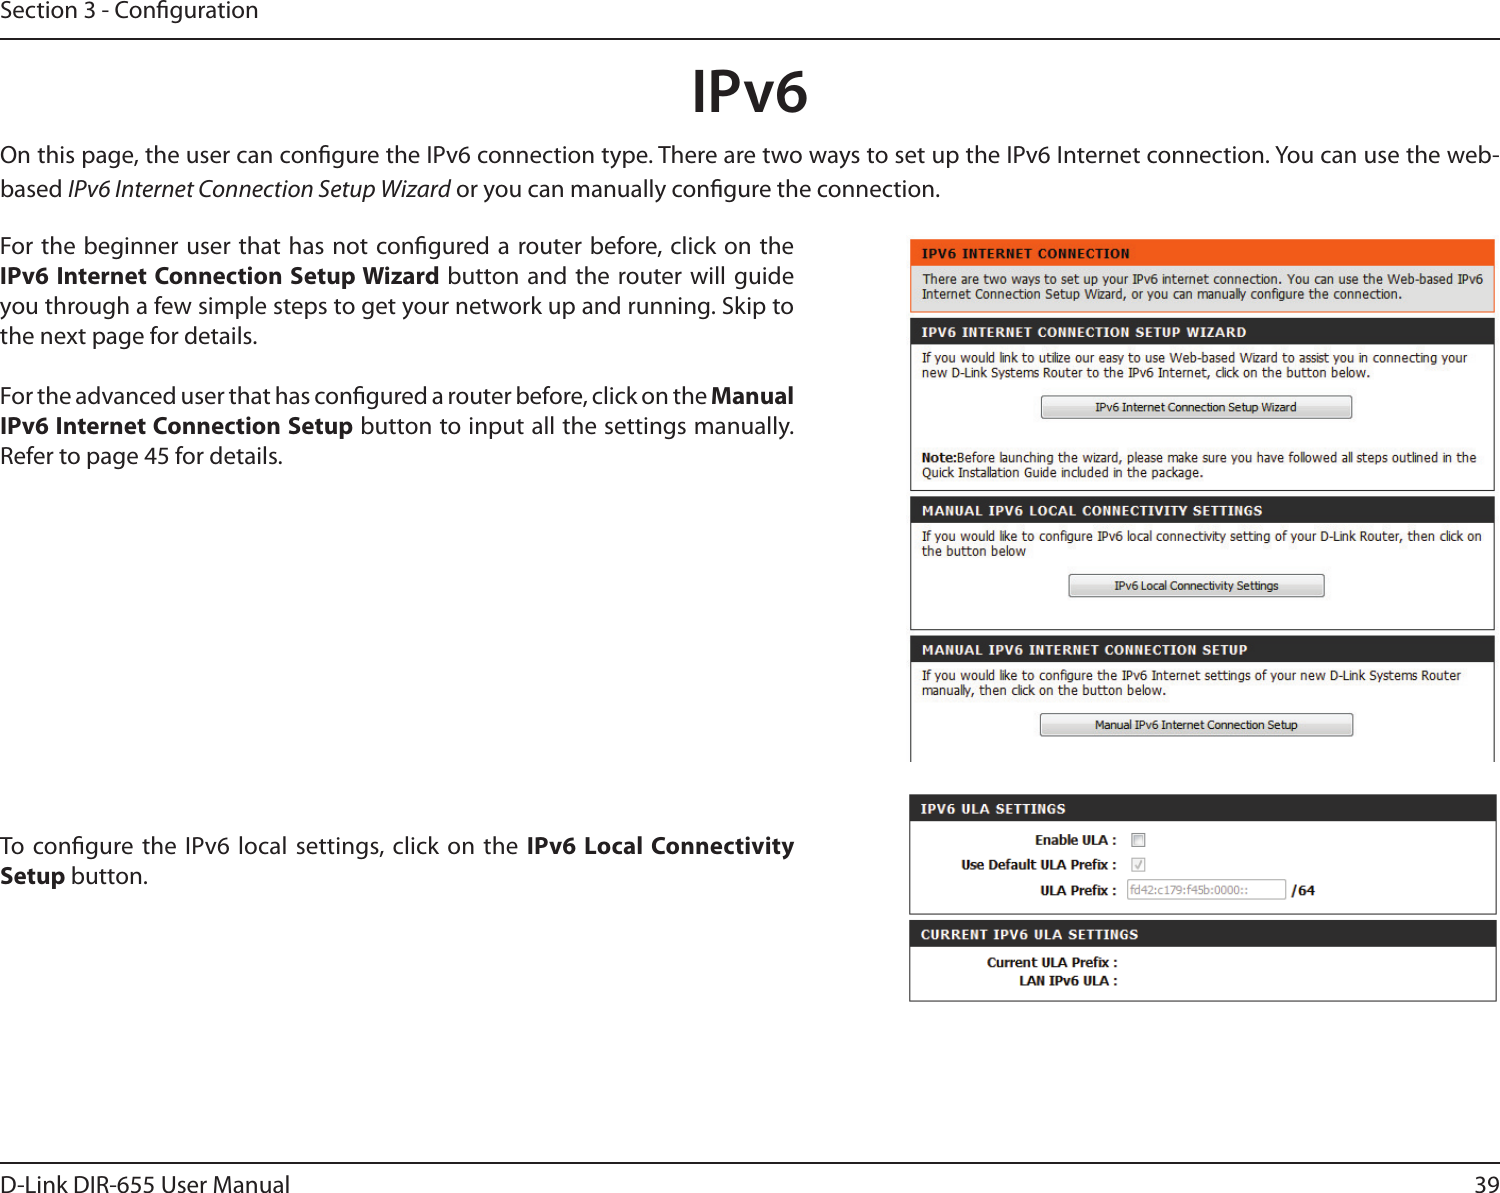 39D-Link DIR-655 User ManualSection 3 - CongurationIPv6On this page, the user can congure the IPv6 connection type. There are two ways to set up the IPv6 Internet connection. You can use the web-based IPv6 Internet Connection Setup Wizard or you can manually congure the connection.For the beginner user that has not congured a router before, click on the IPv6 Internet Connection Setup Wizard button and the  router will guide you through a few simple steps to get your network up and running. Skip to the next page for details.For the advanced user that has congured a router before, click on the Manual IPv6 Internet Connection Setup button to input all the settings manually. Refer to page 45 for details.To congure the  IPv6 local settings, click  on  the IPv6 Local Connectivity Setup button.